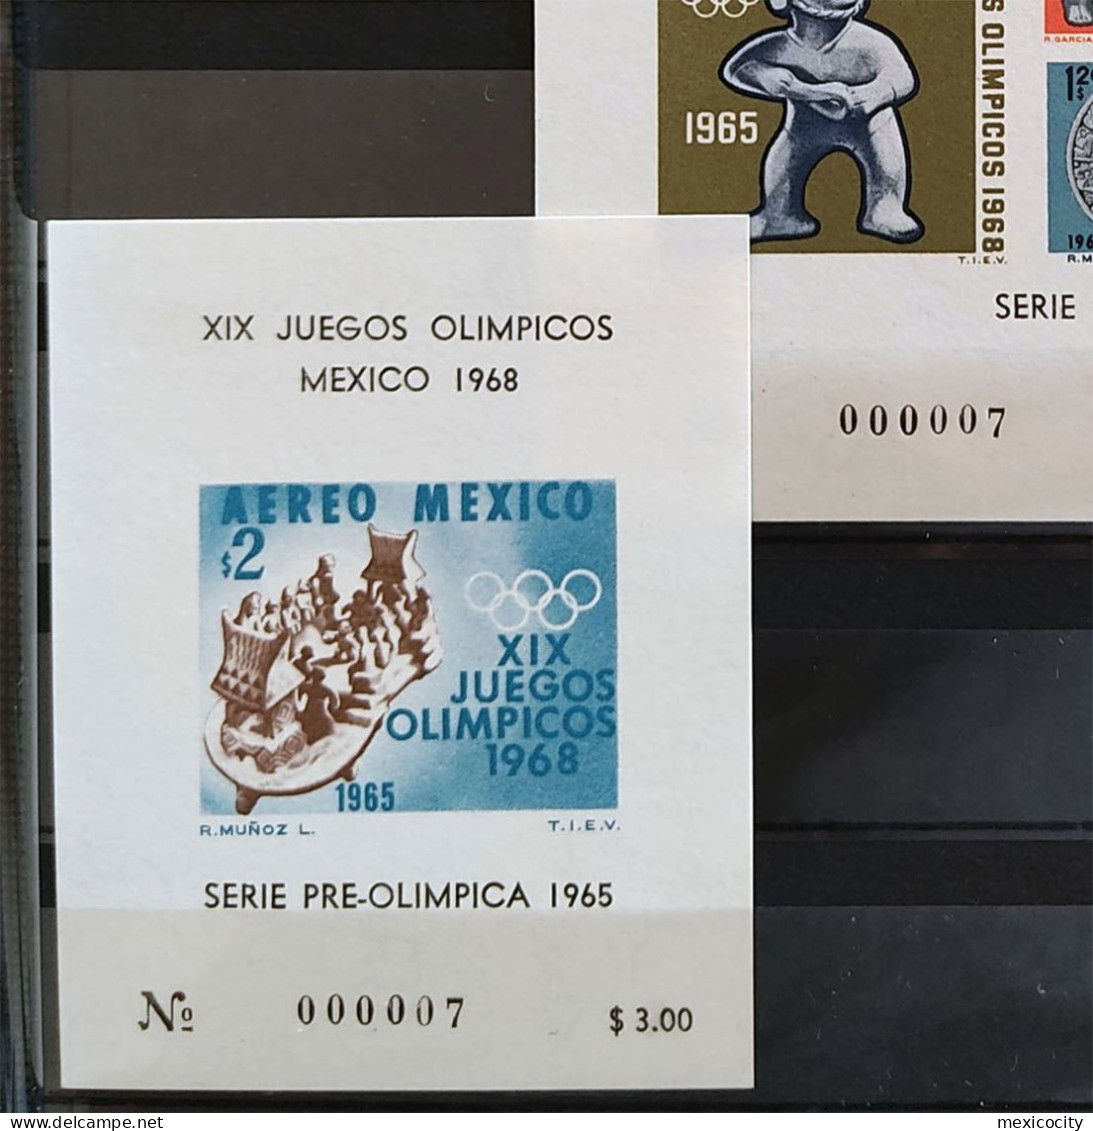 MEXICO 1965 OLYMPIC GAMES MATCHED SHEETS # 000007 Number On Each + UNIQUE Thus MNG As Issued - Messico